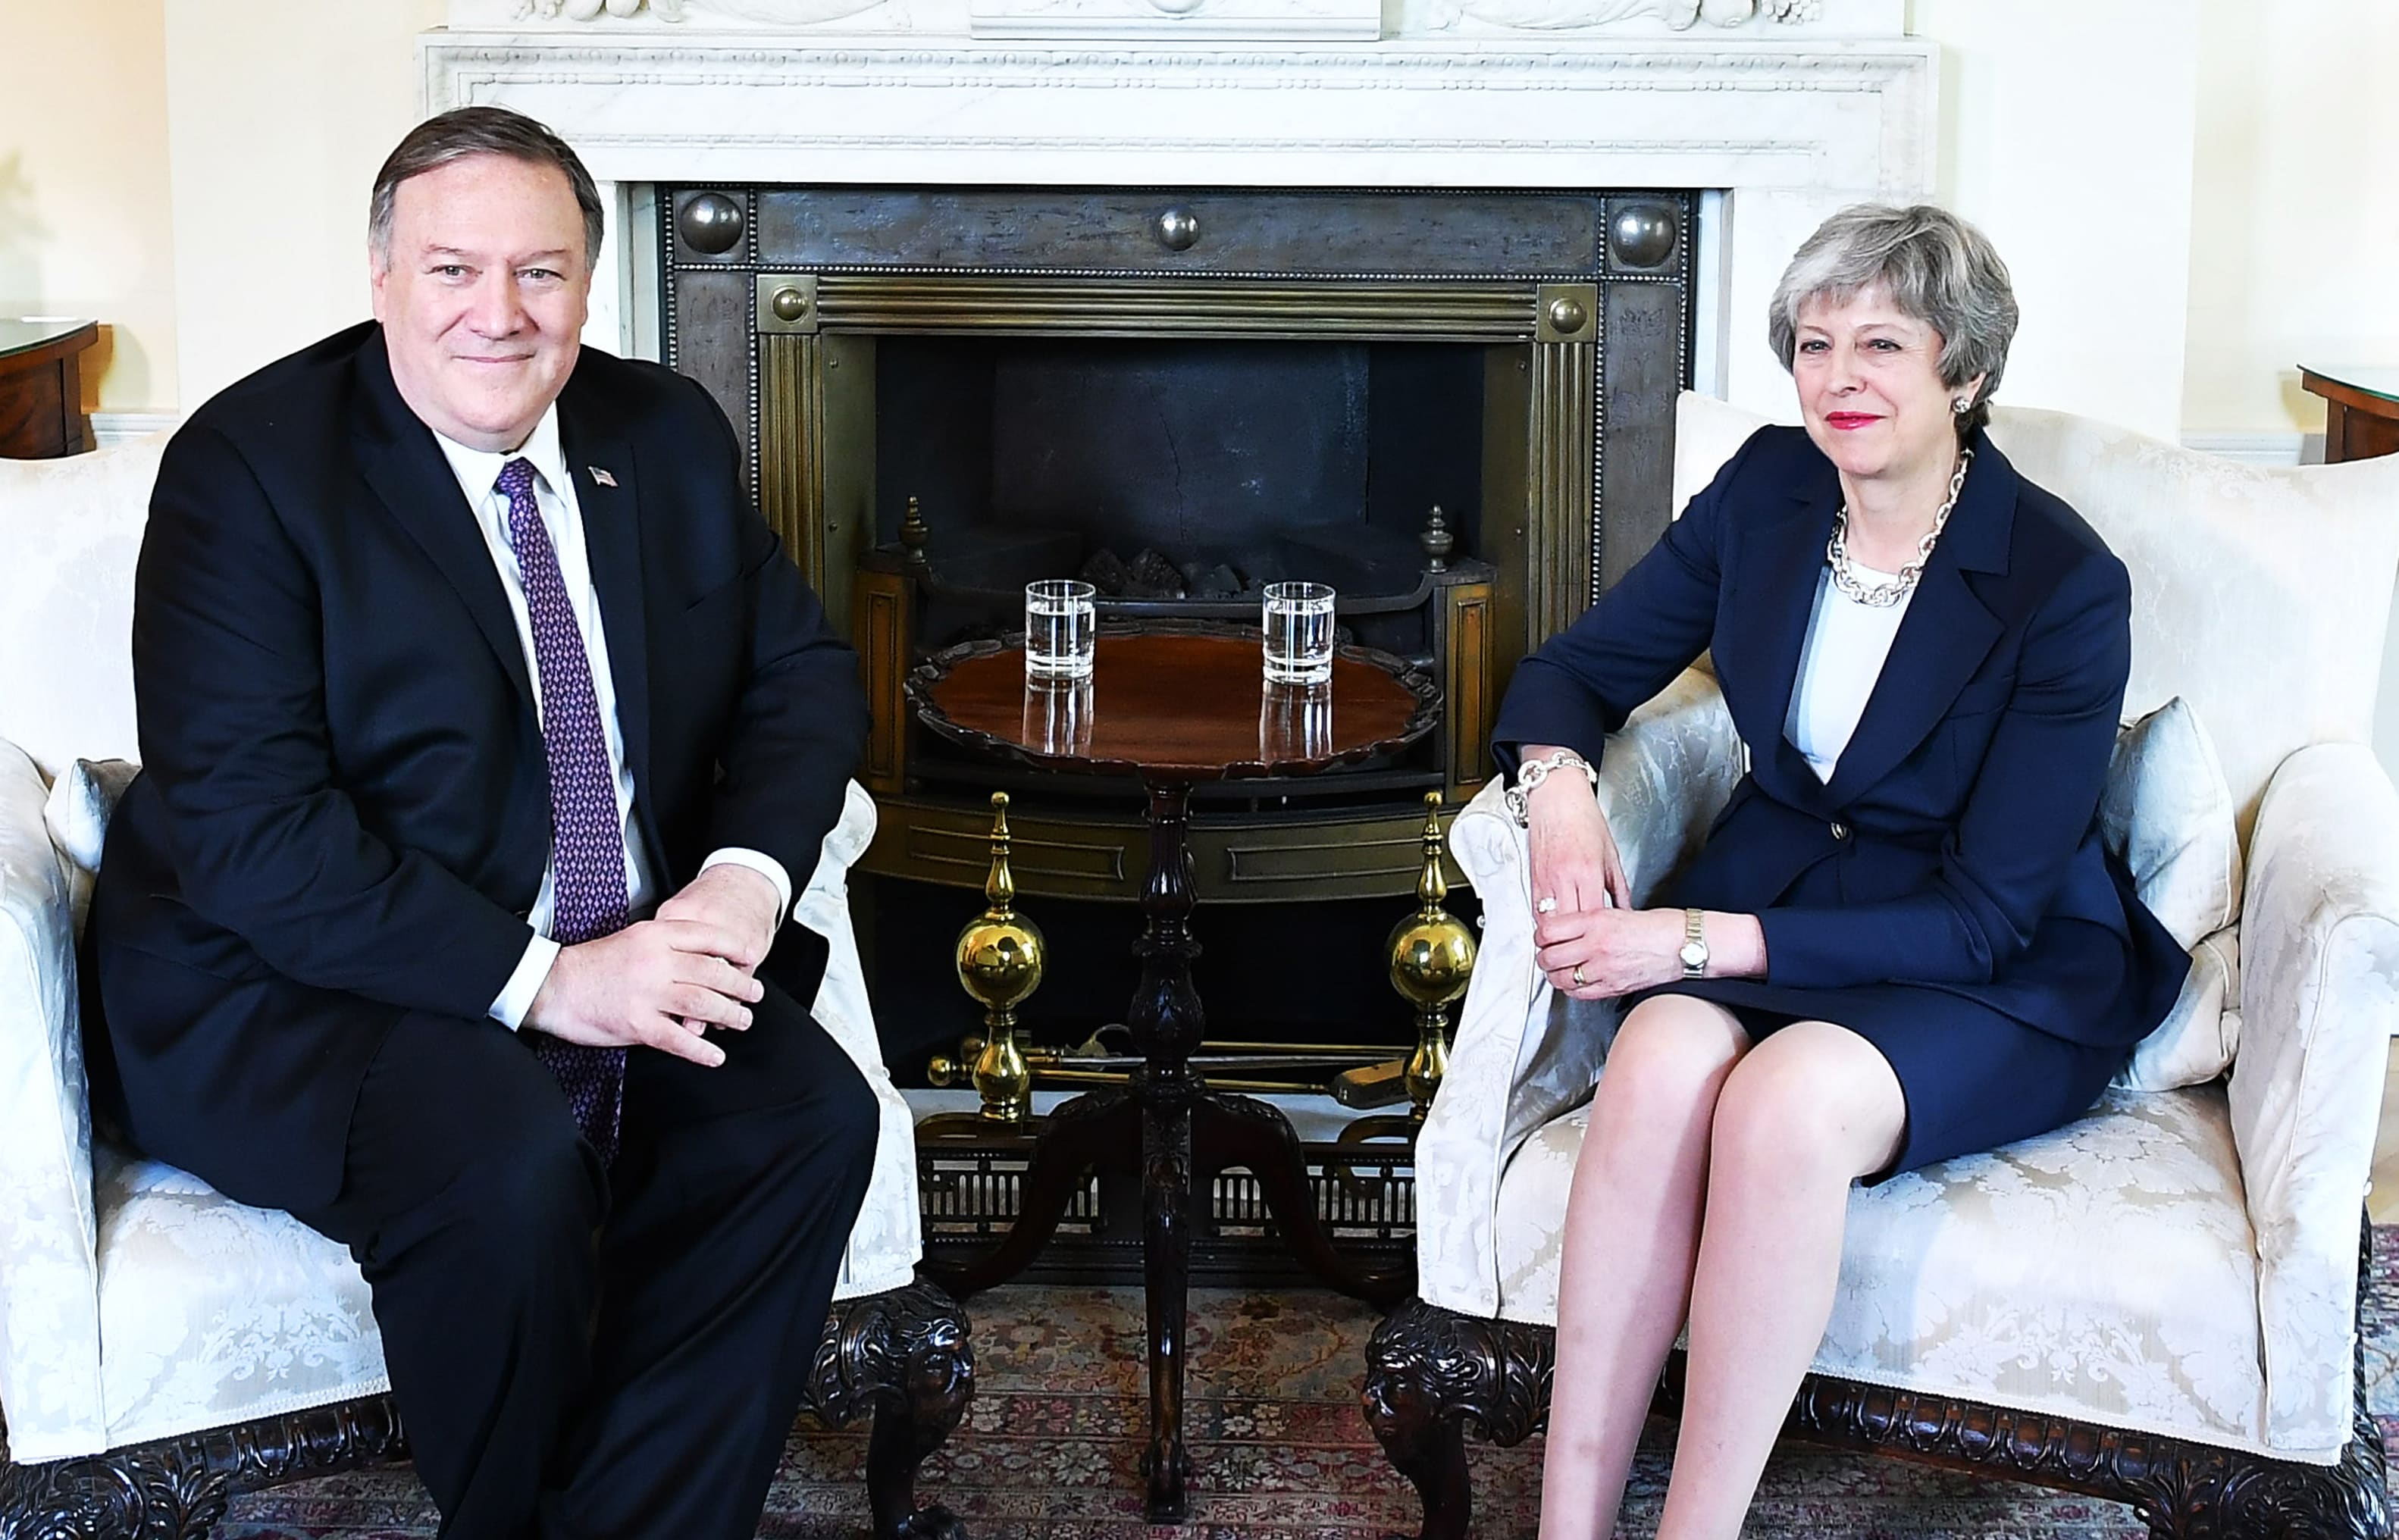 US Secretary of State Mike Pompeo meets with Britain's Prime Minister Theresa May at 10 Downing Street.